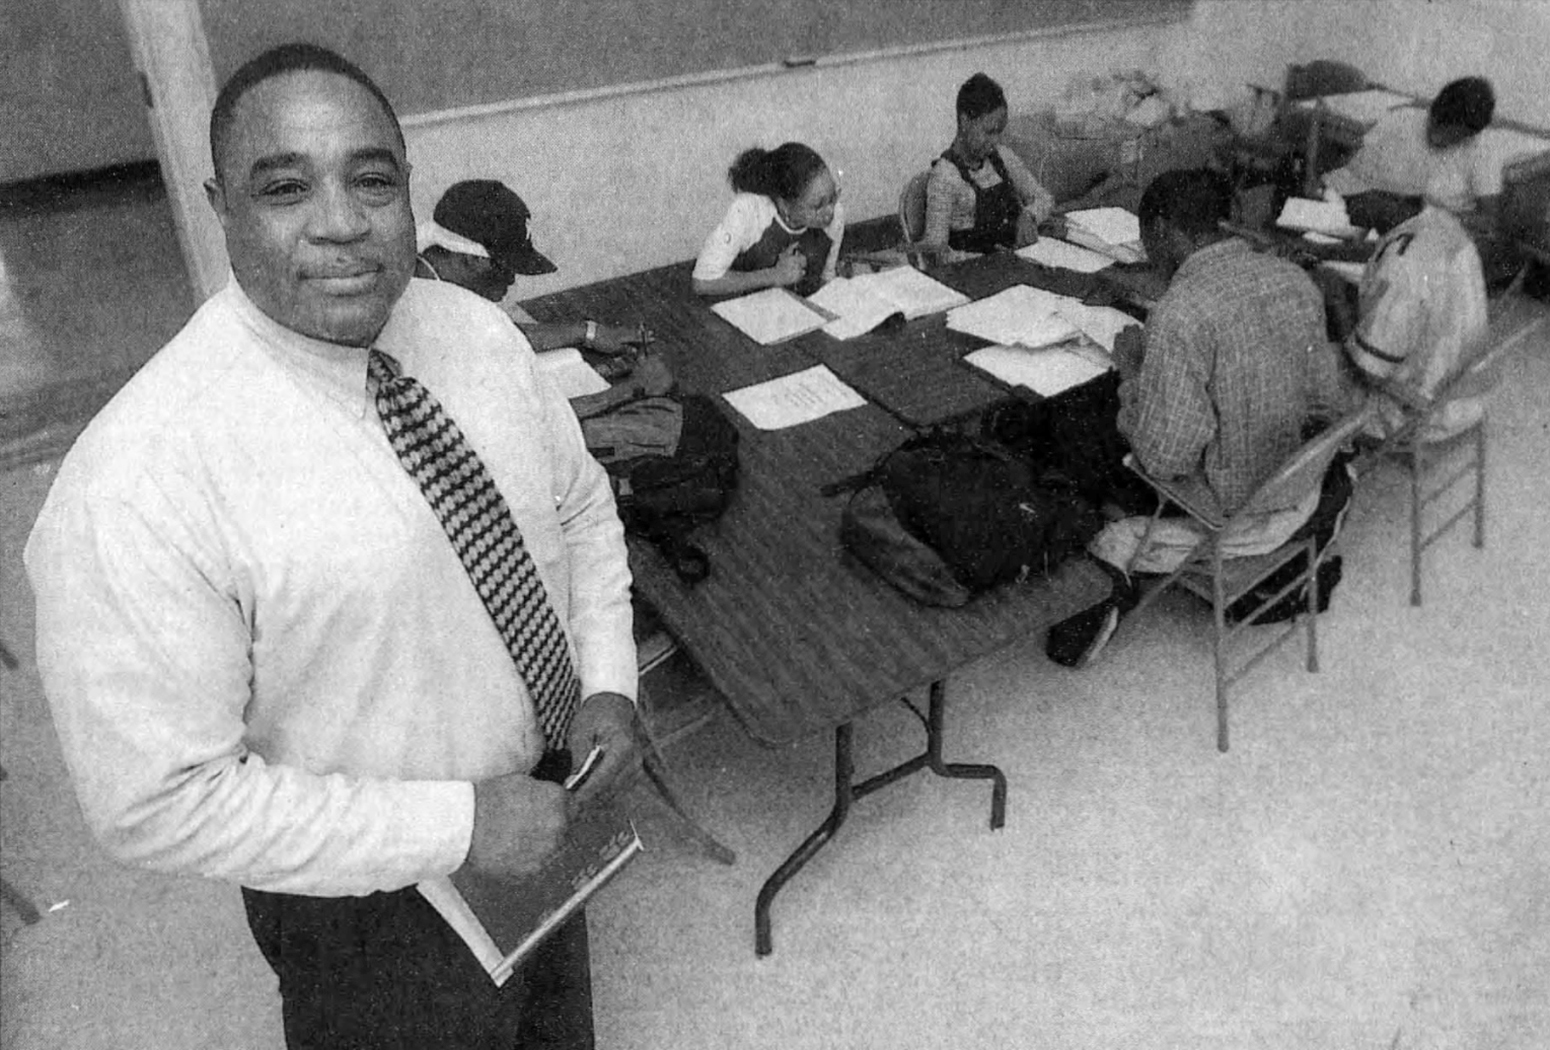 Overhead shot of Weatherby smiling while students with open textbooks sit at a desk in the background